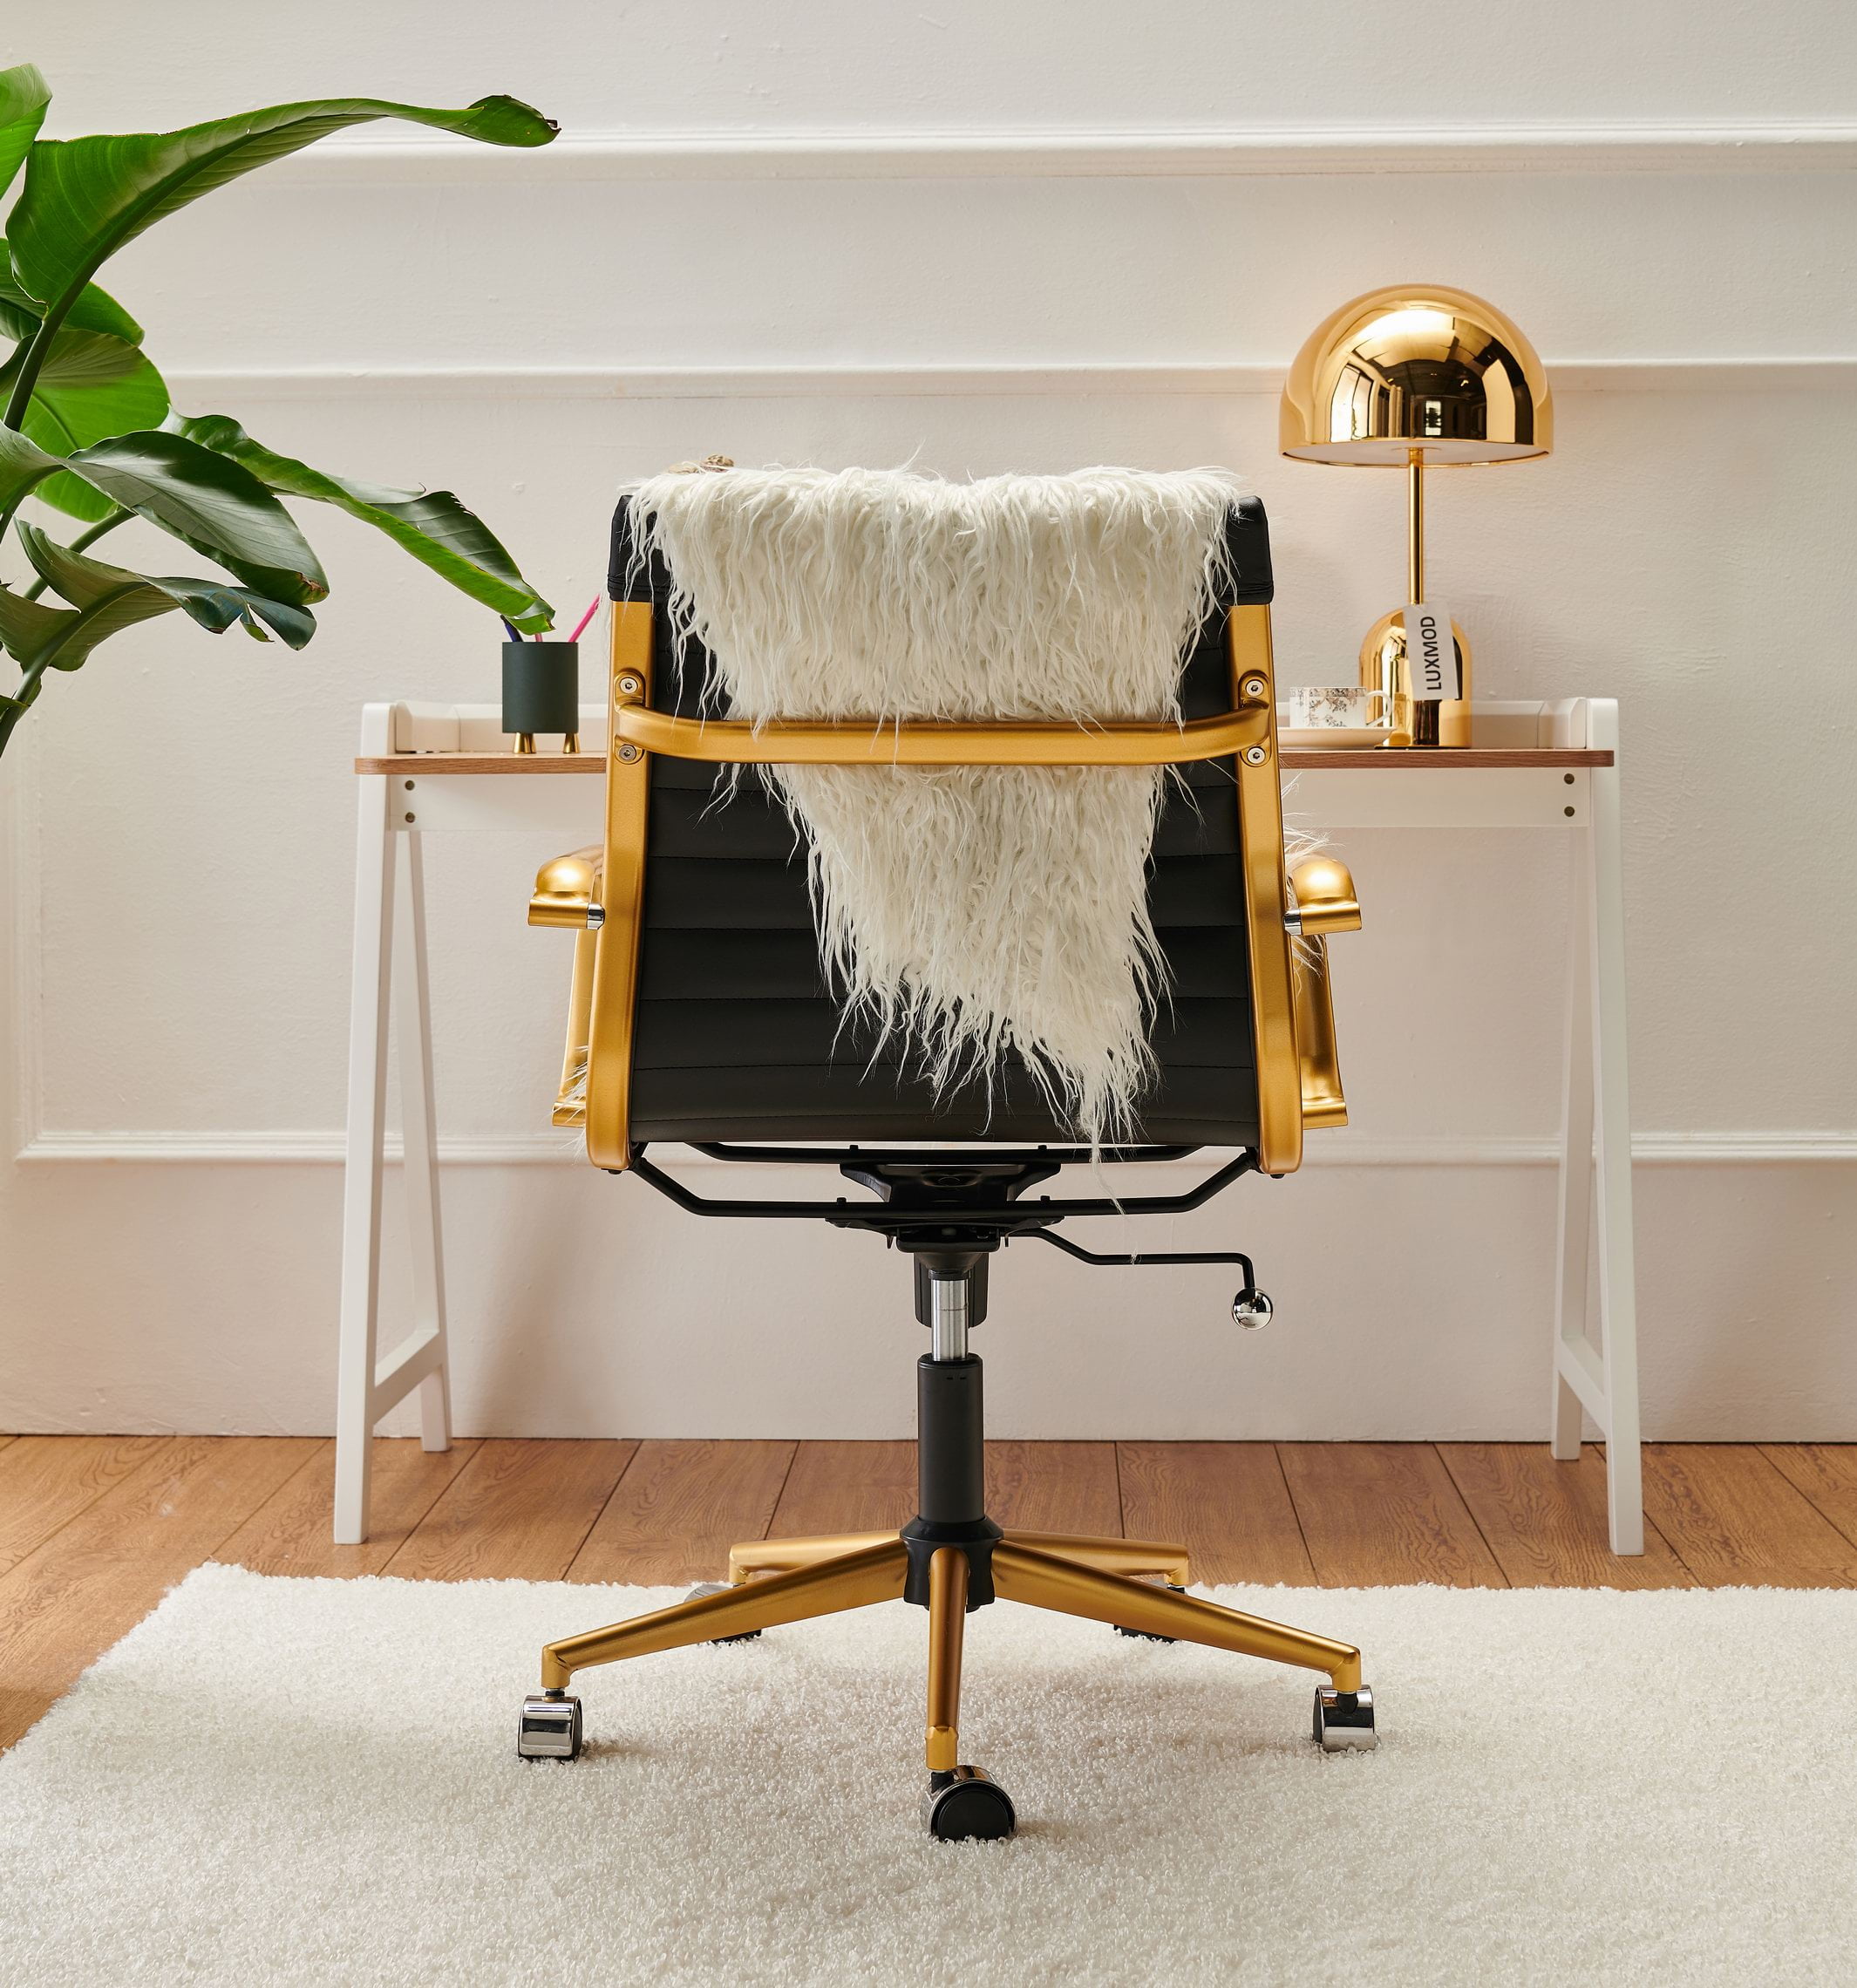 LUXMOD Gold Office Chair in Black Leather, Mid Back Office